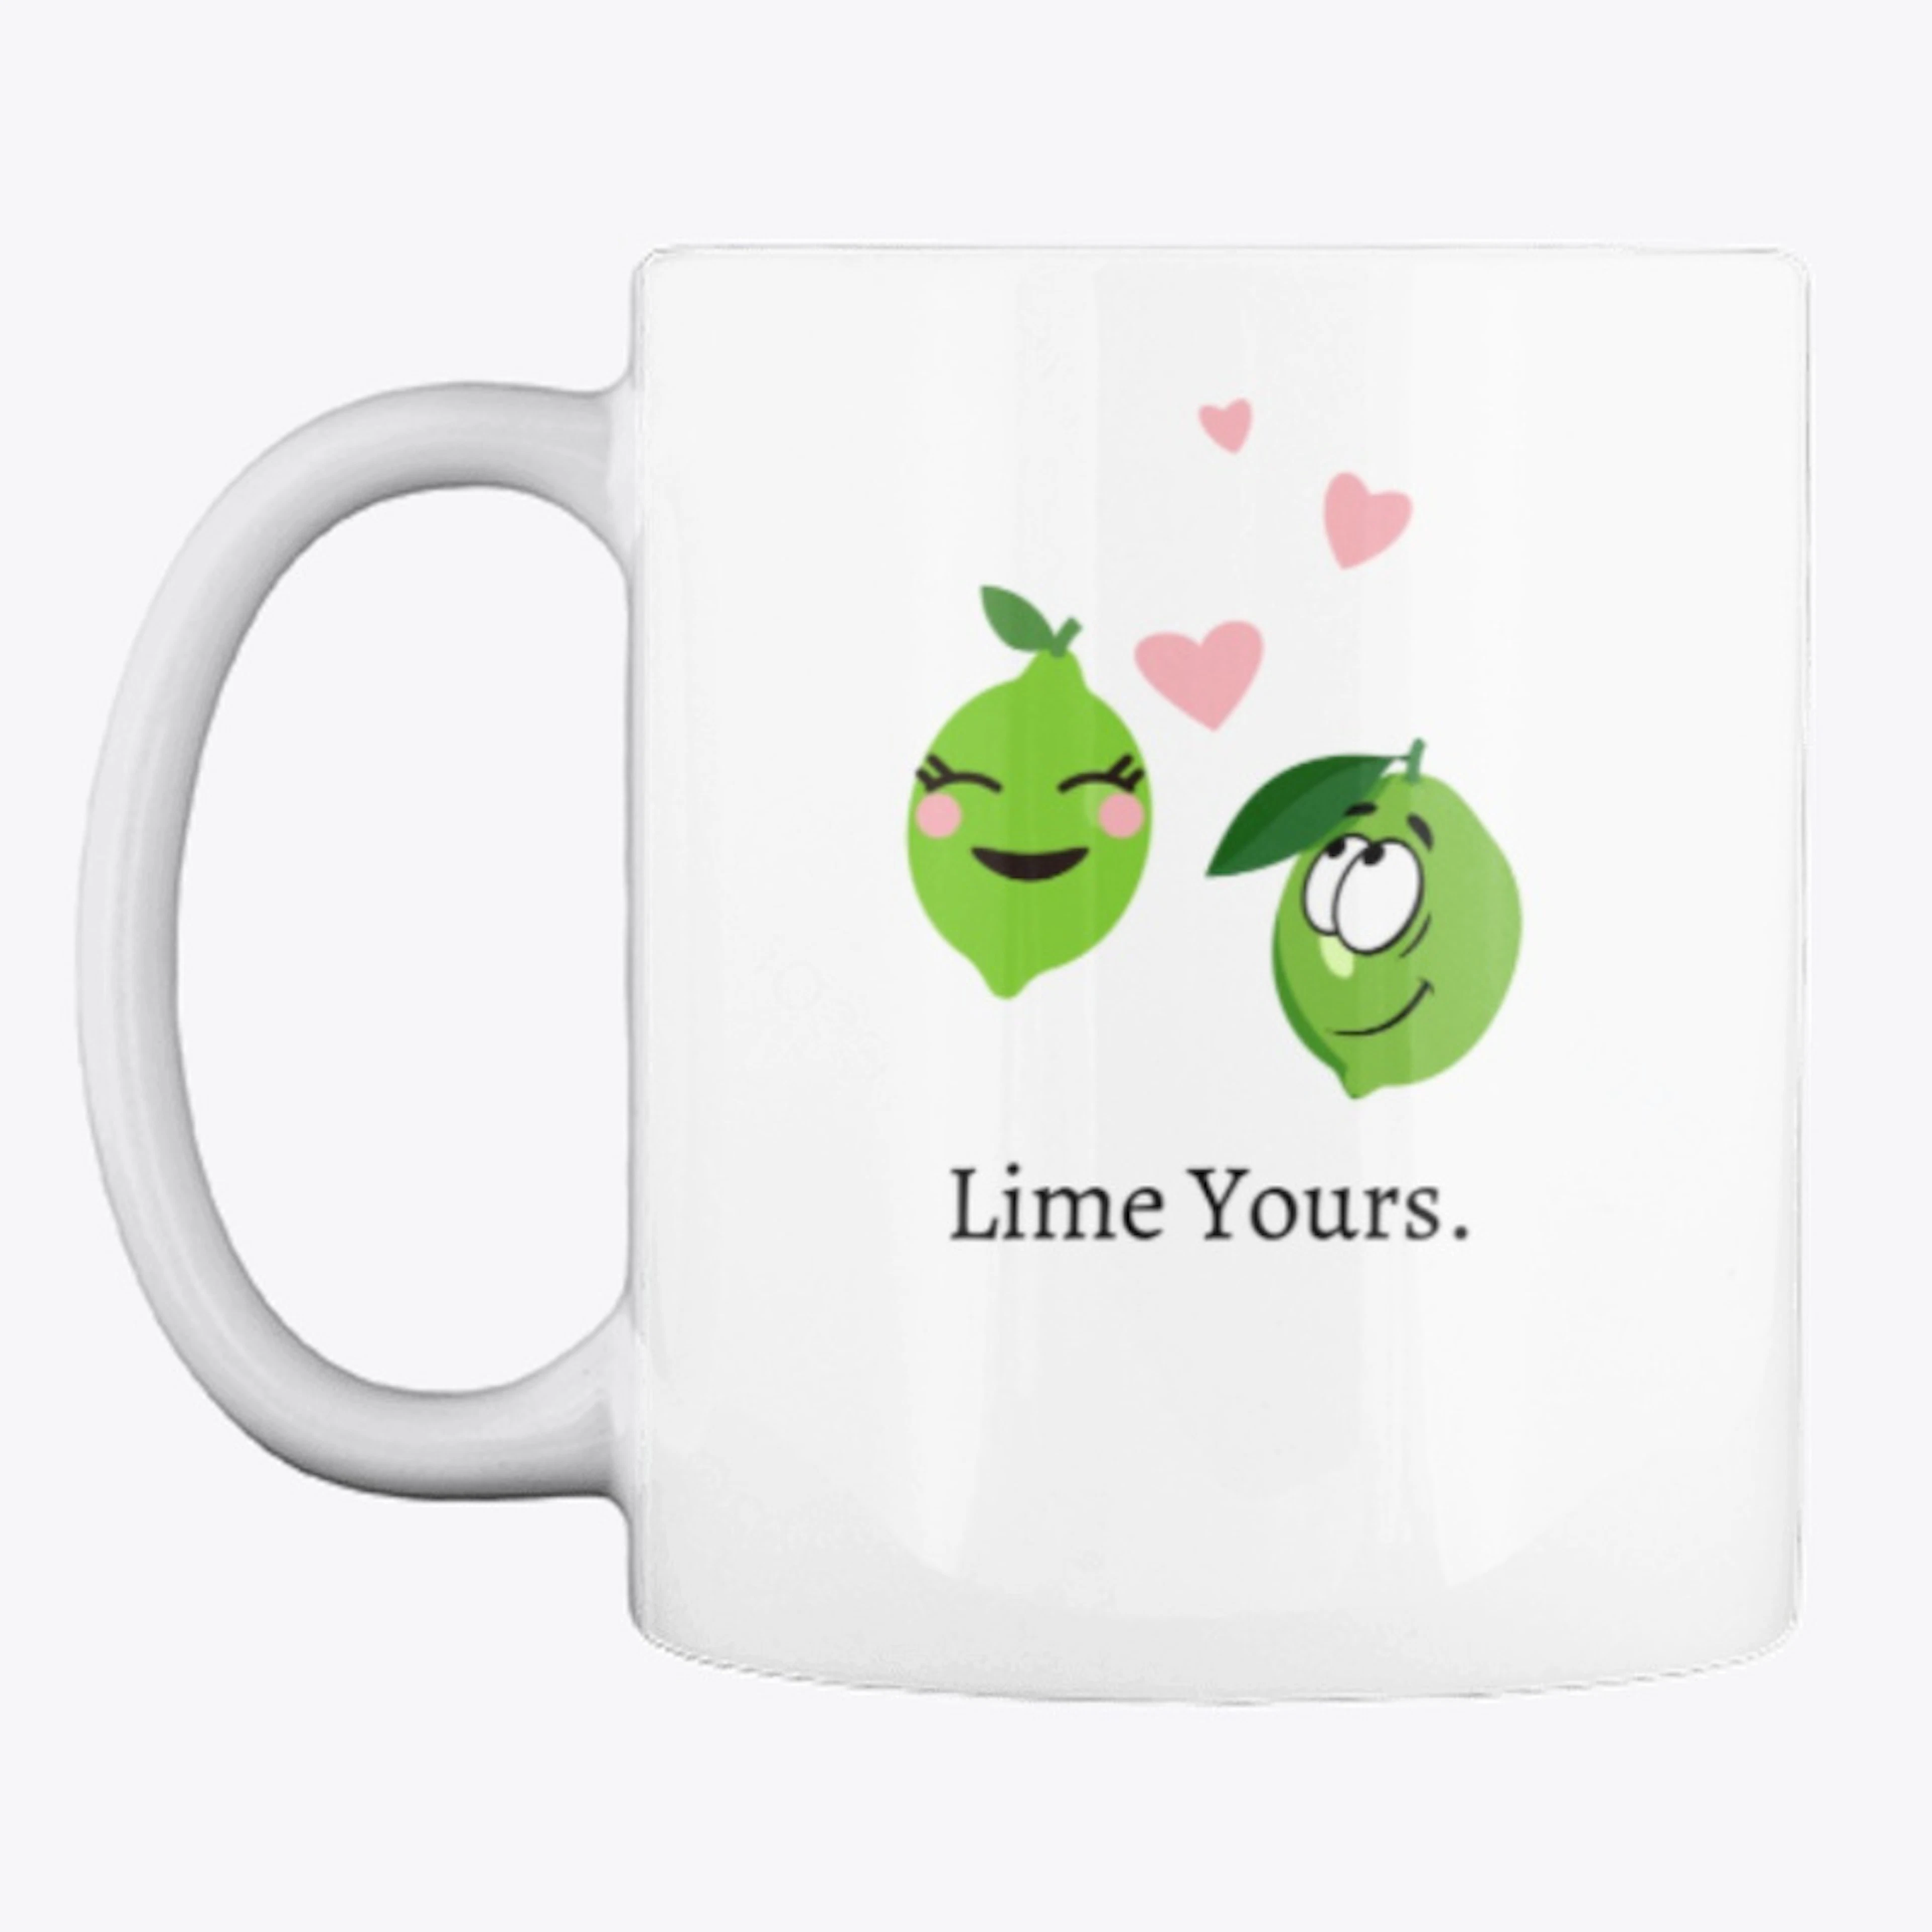 Fruit Puns: Lime yours.